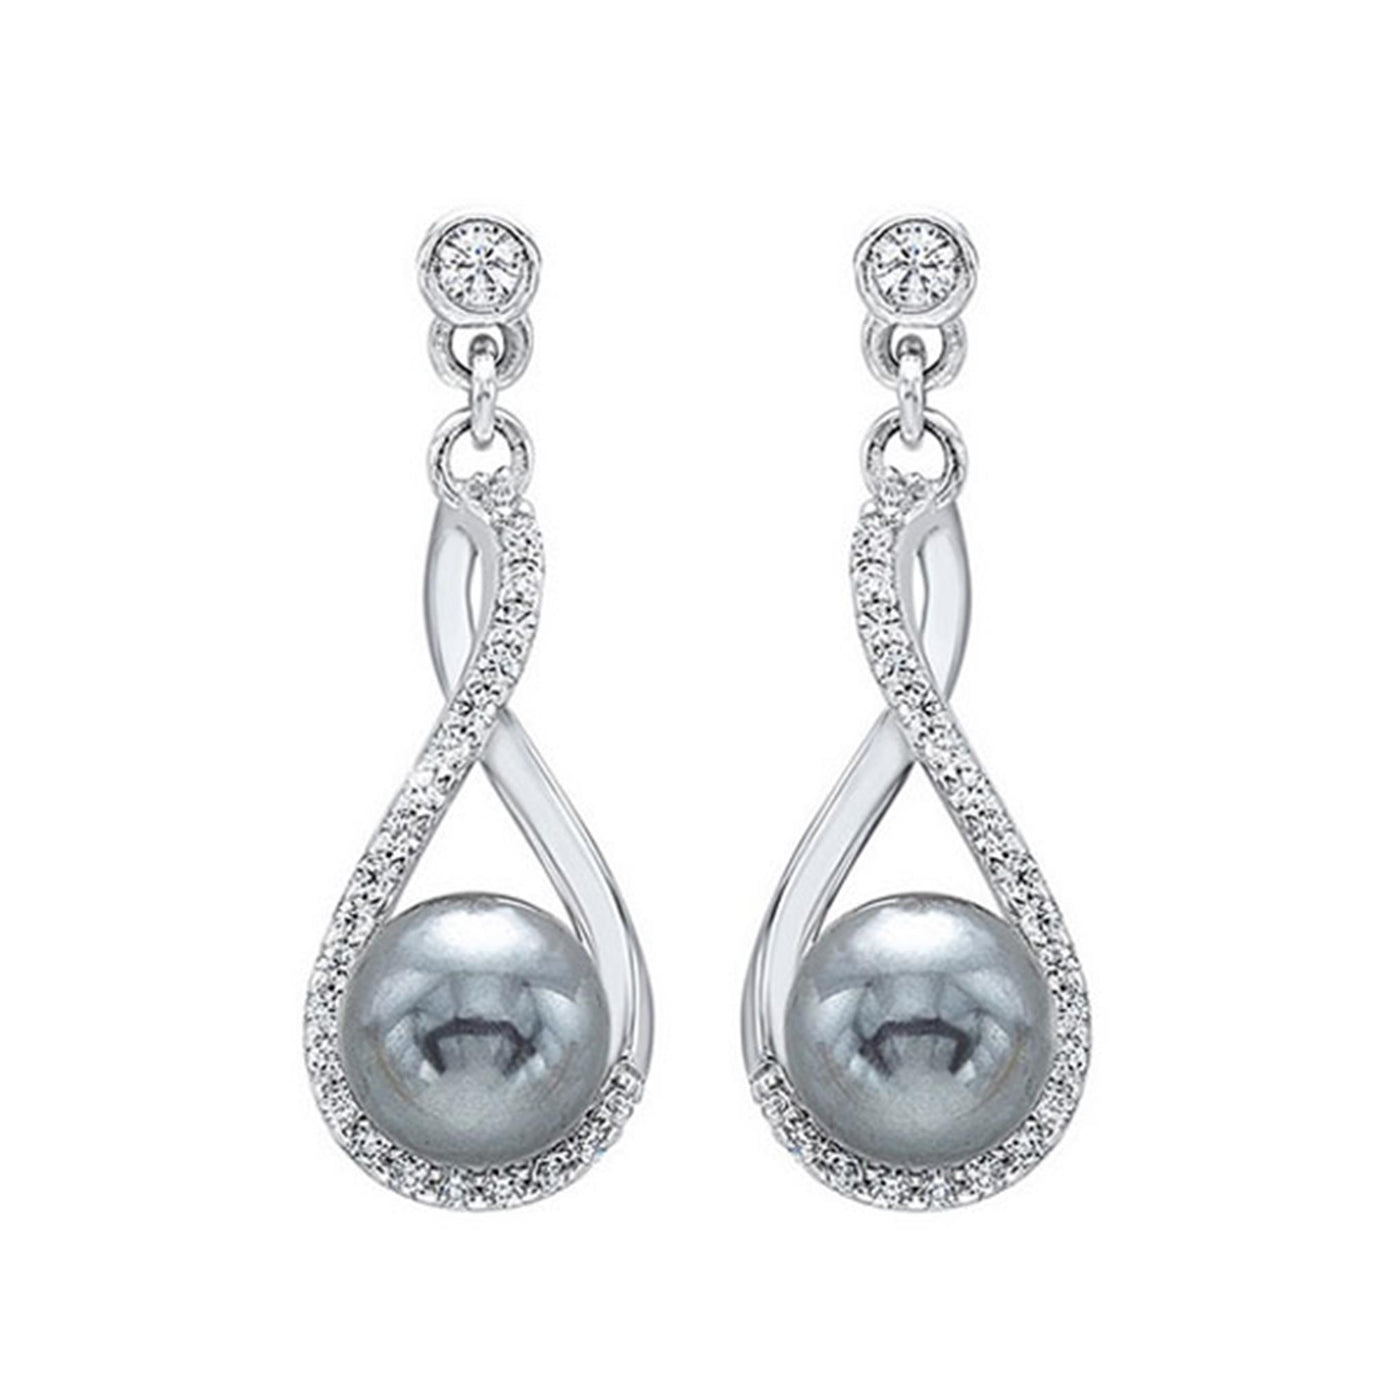 One Pair of Sterling Silver Dangle Style Earrings Featuring Grey Simulated Shell Pearls and Cubic Zirconium